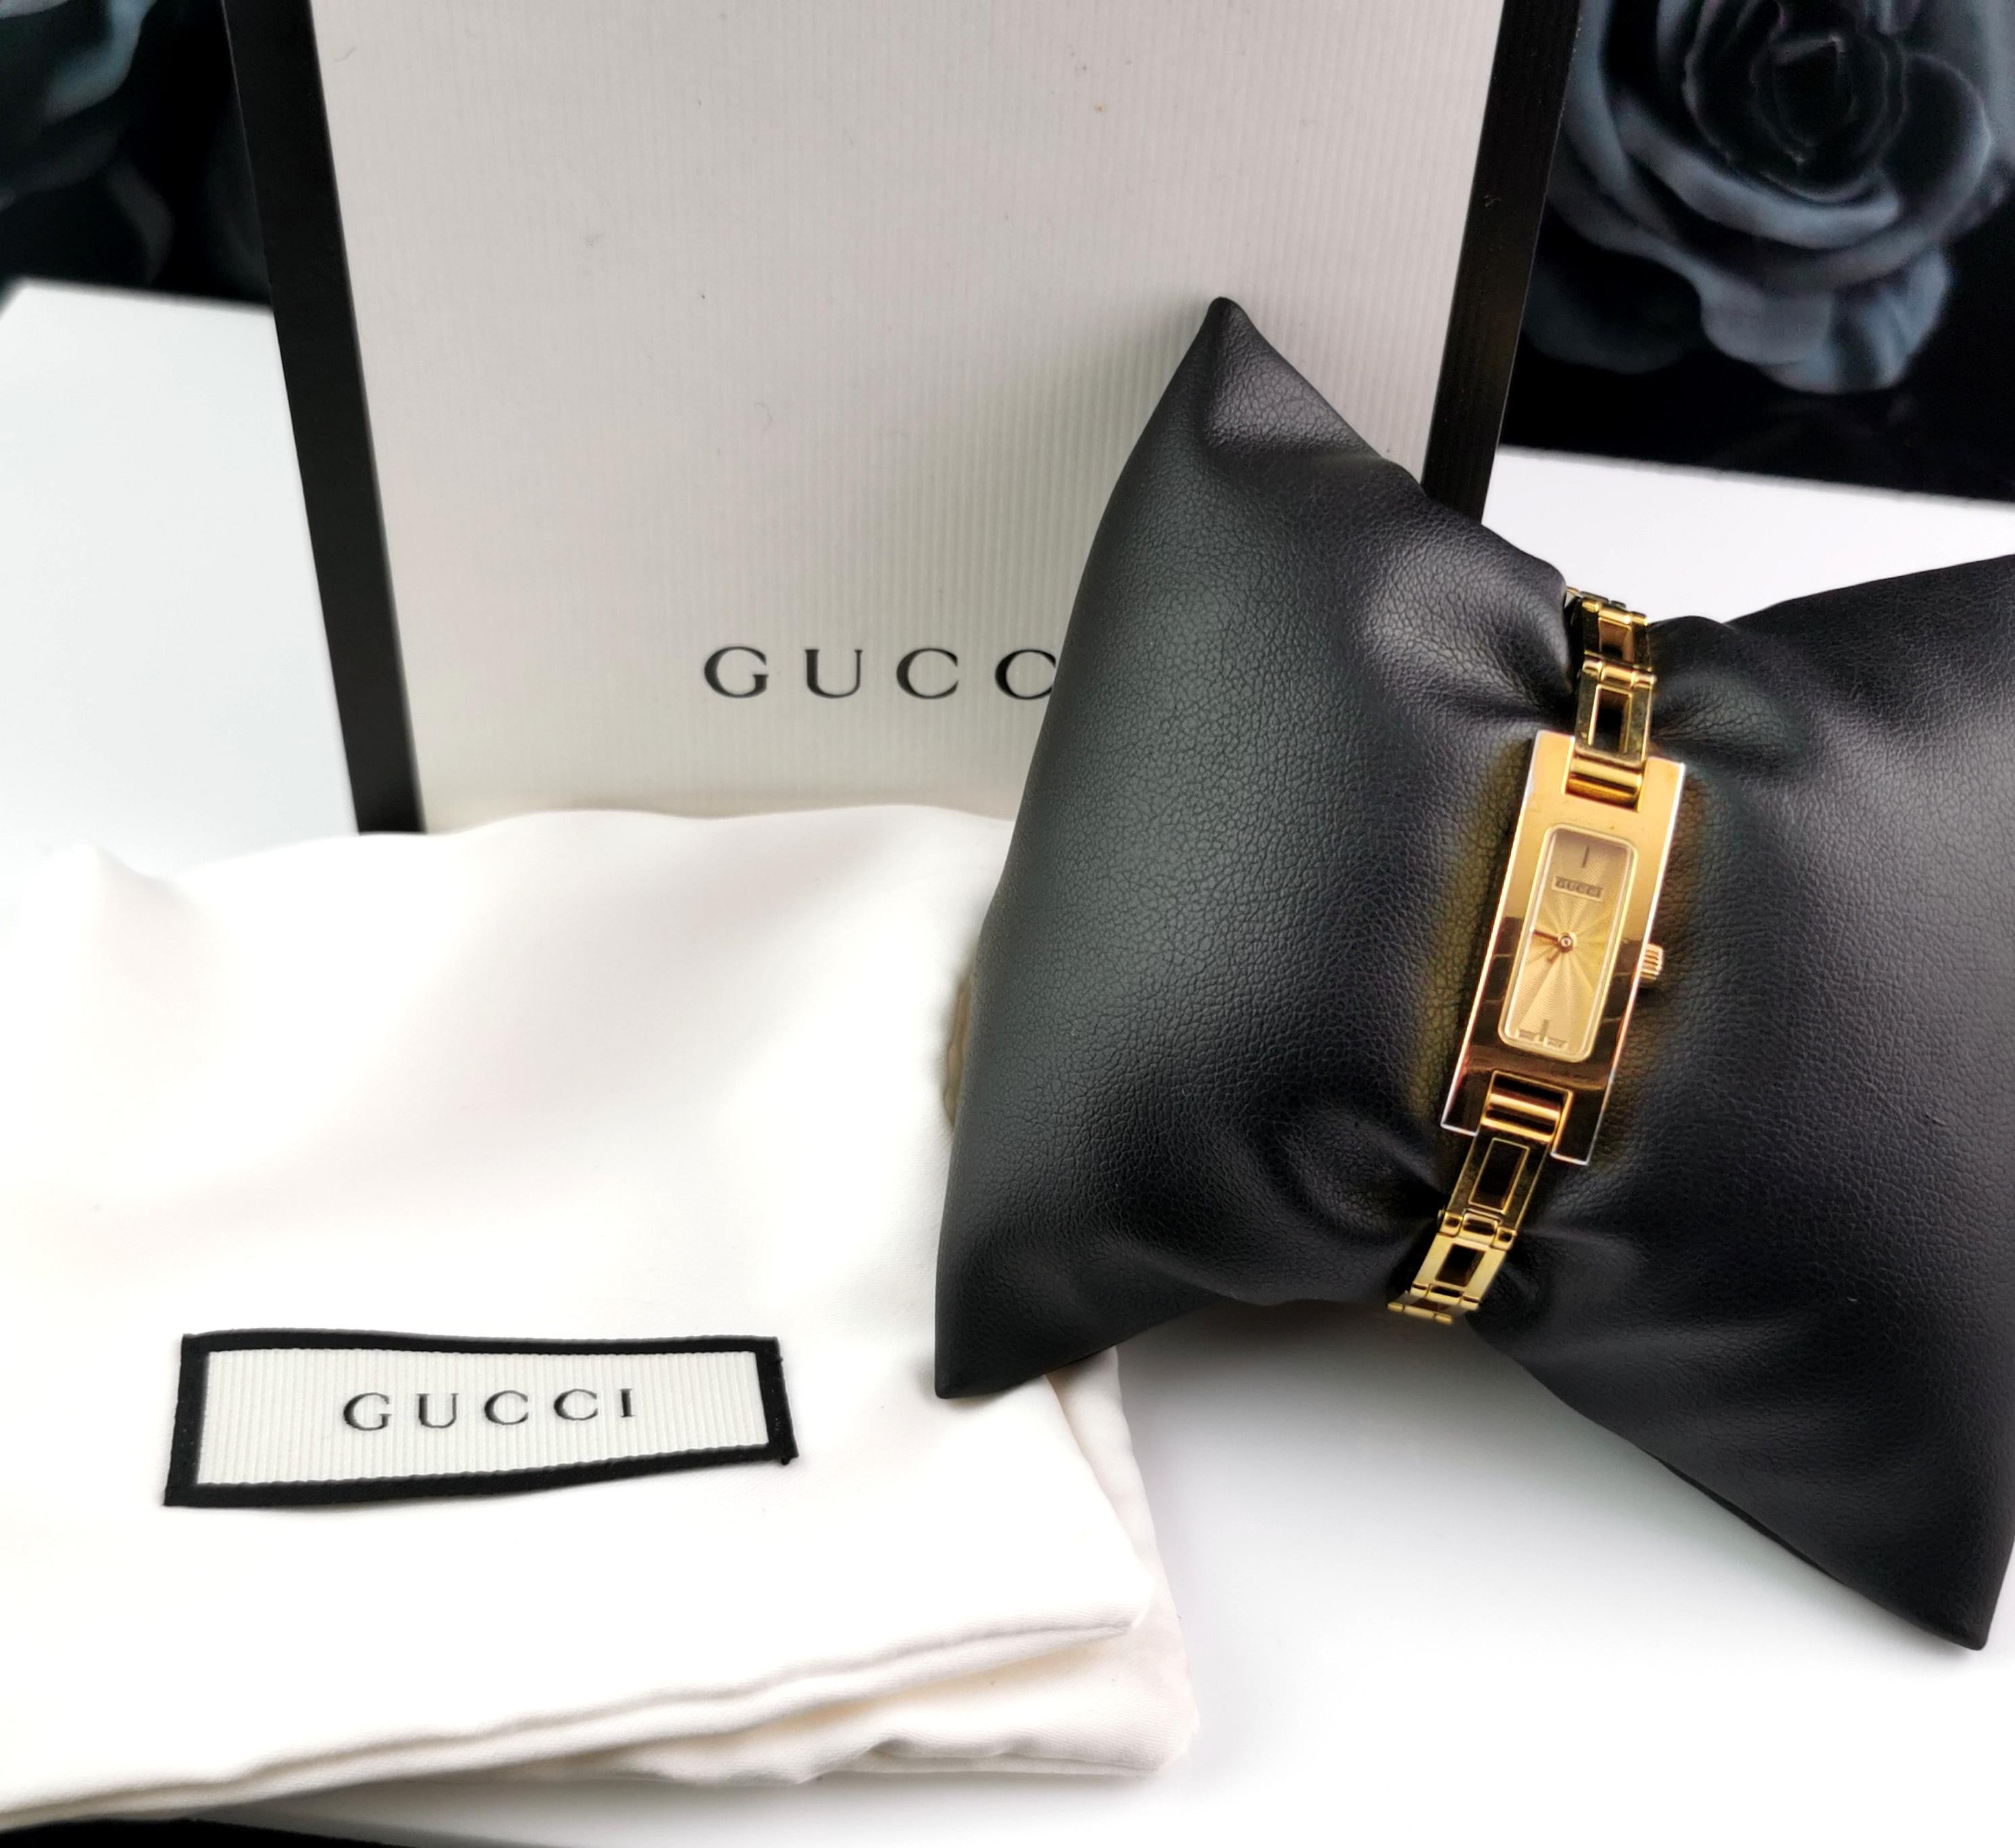 A stylish ladies Gucci 3900l gold plated watch. 

This is a bracelet strap watch with an elegant rectangular shape face and a champagne gold dial. 

Most often come in white and black dial colour so this is a particularly nice one with the gold